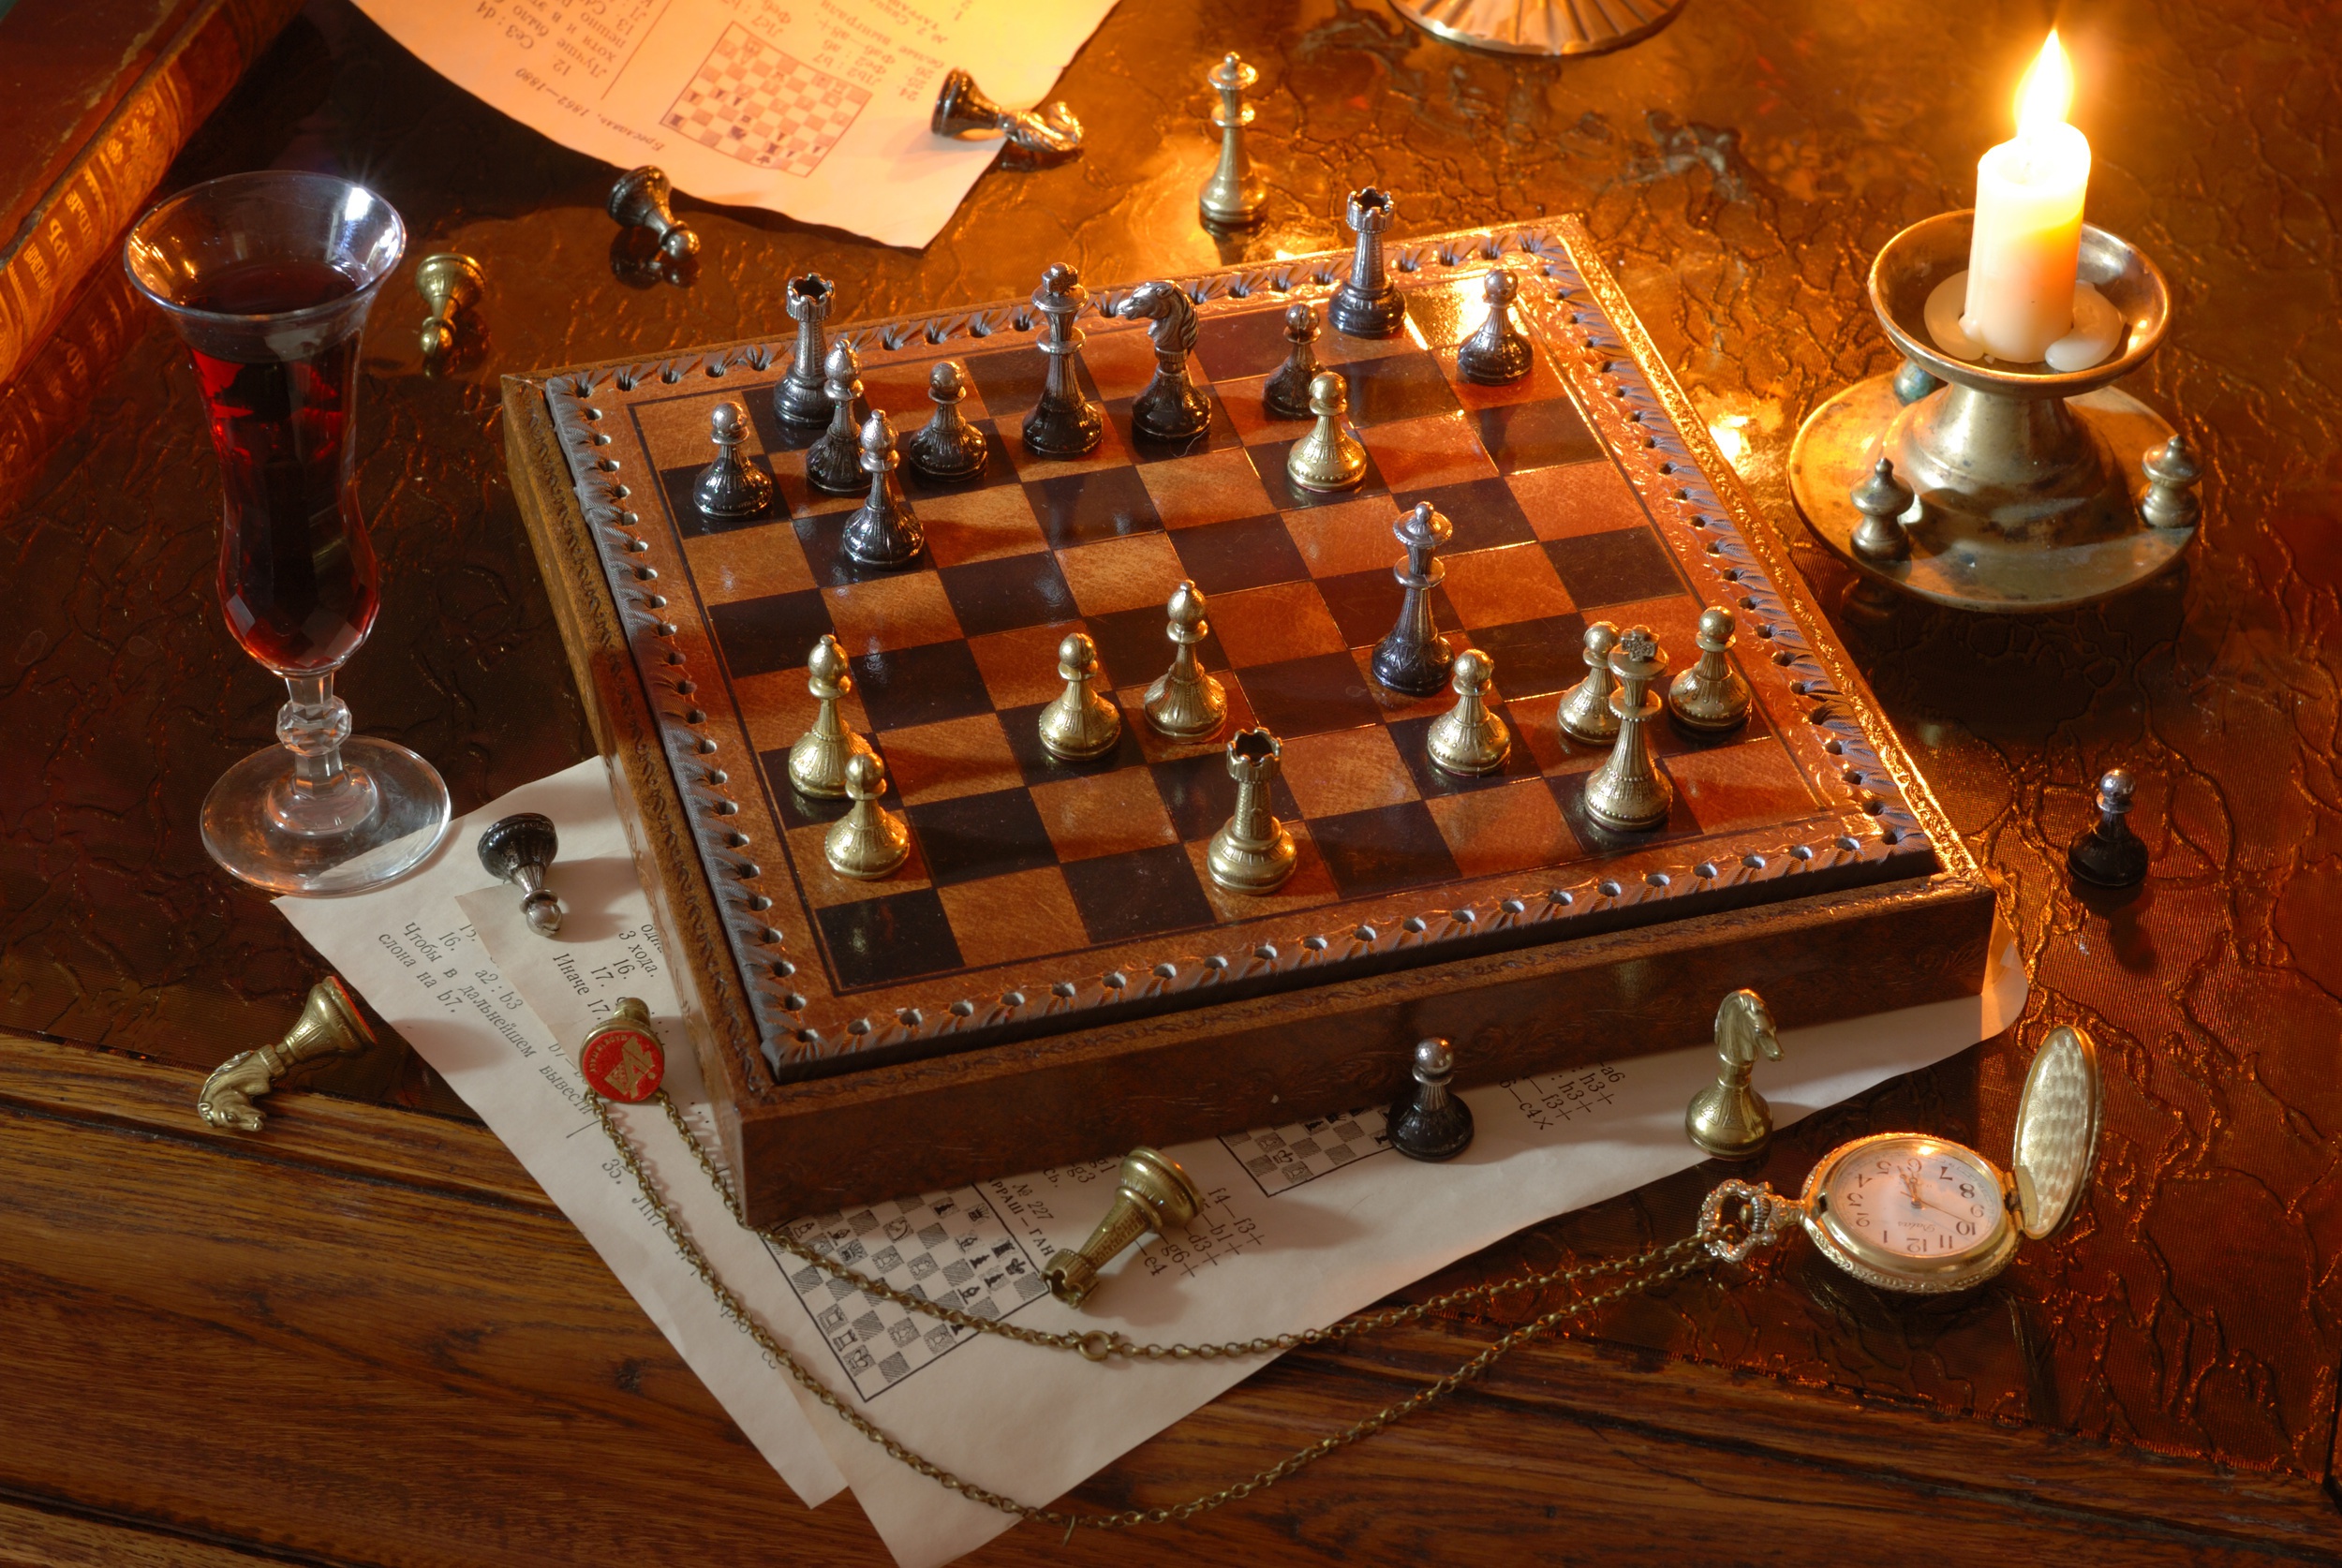 Still Life Candle Pocket Watch Chess Board 2500x1674